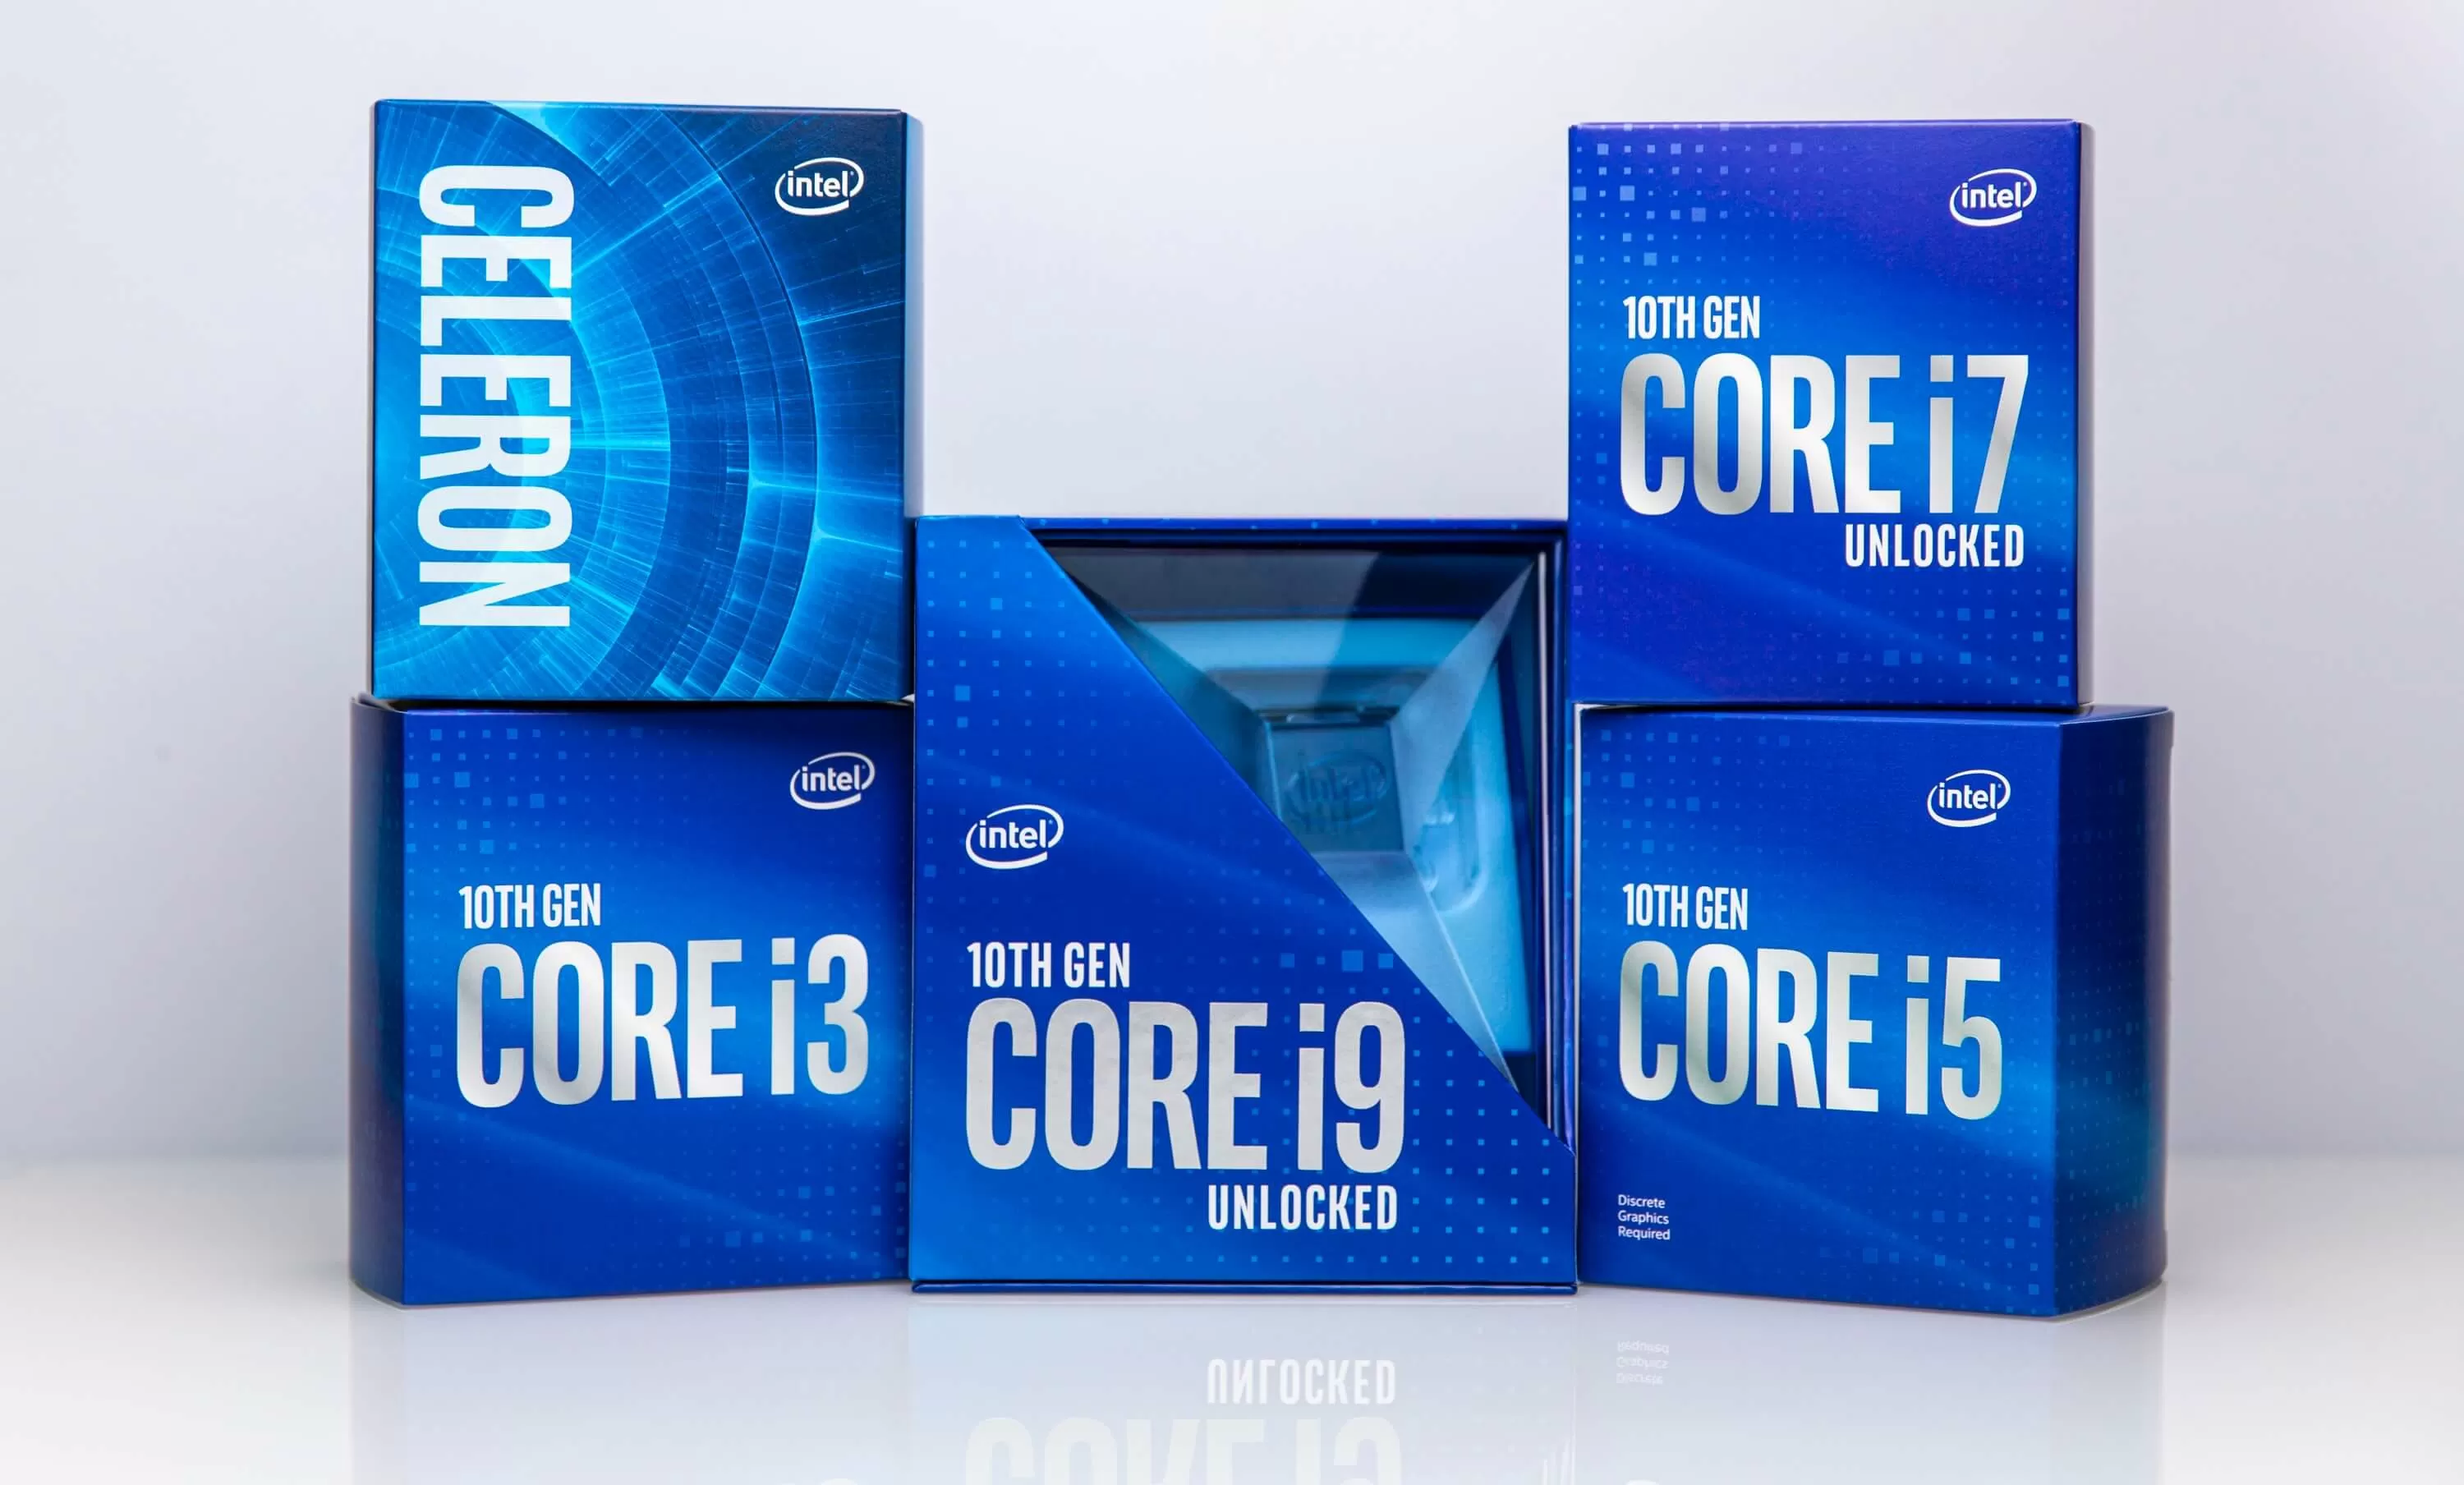 Intel Core i9-10900K is official, boosting up to 5.3 GHz; Core i7 and Core i5 get competitive against Ryzen